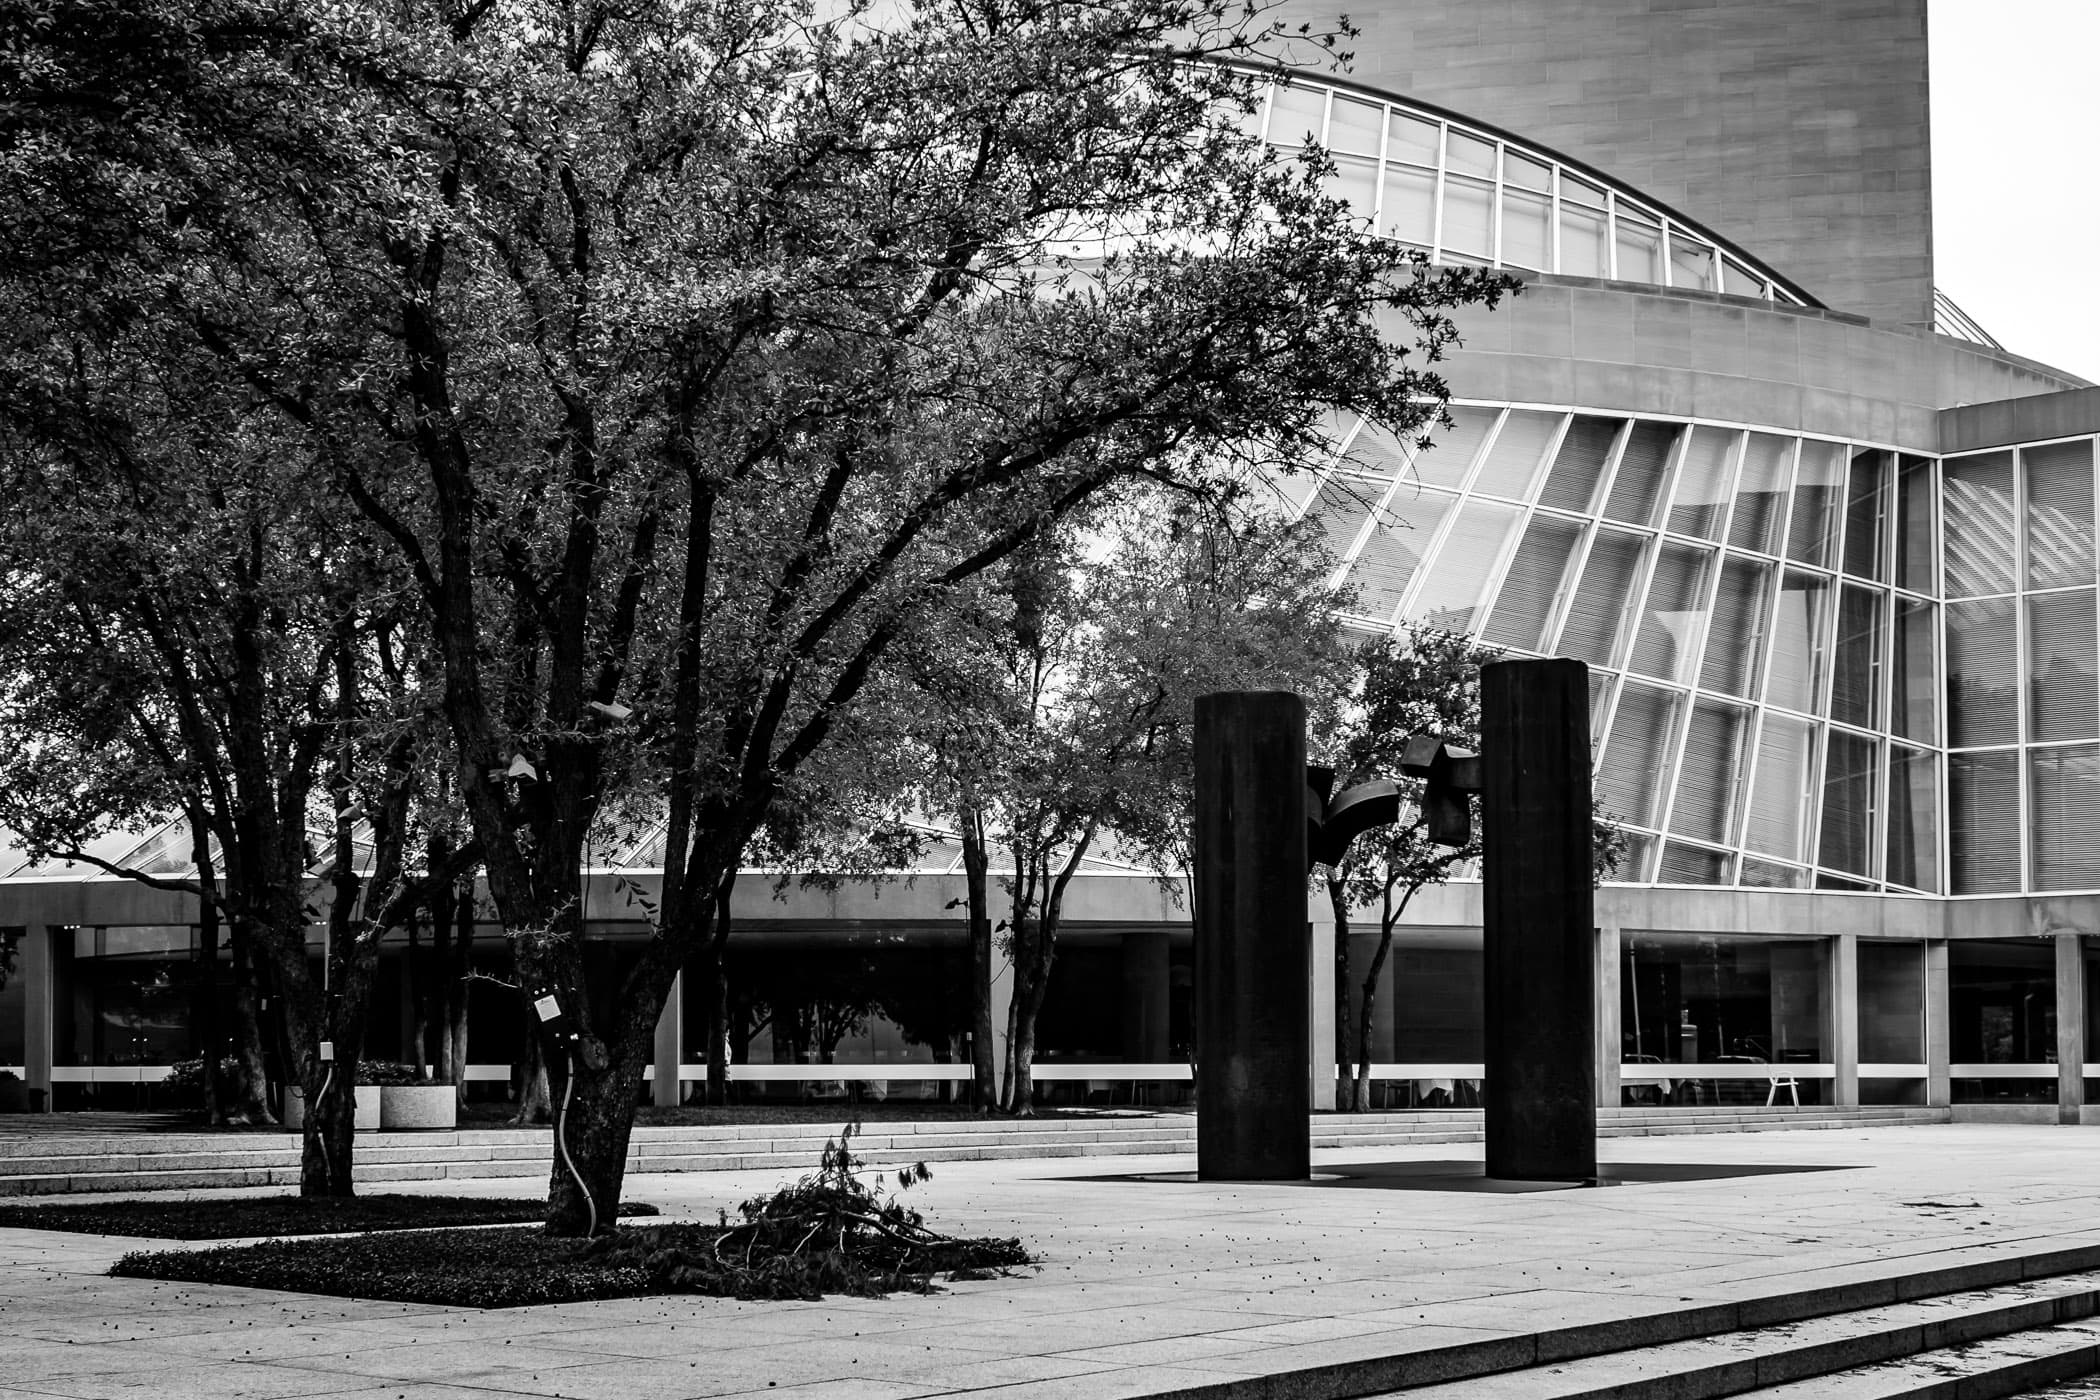 Dallas' Morton H. Meyerson Symphony Center, designed by I.M Pei and opened in 1989.